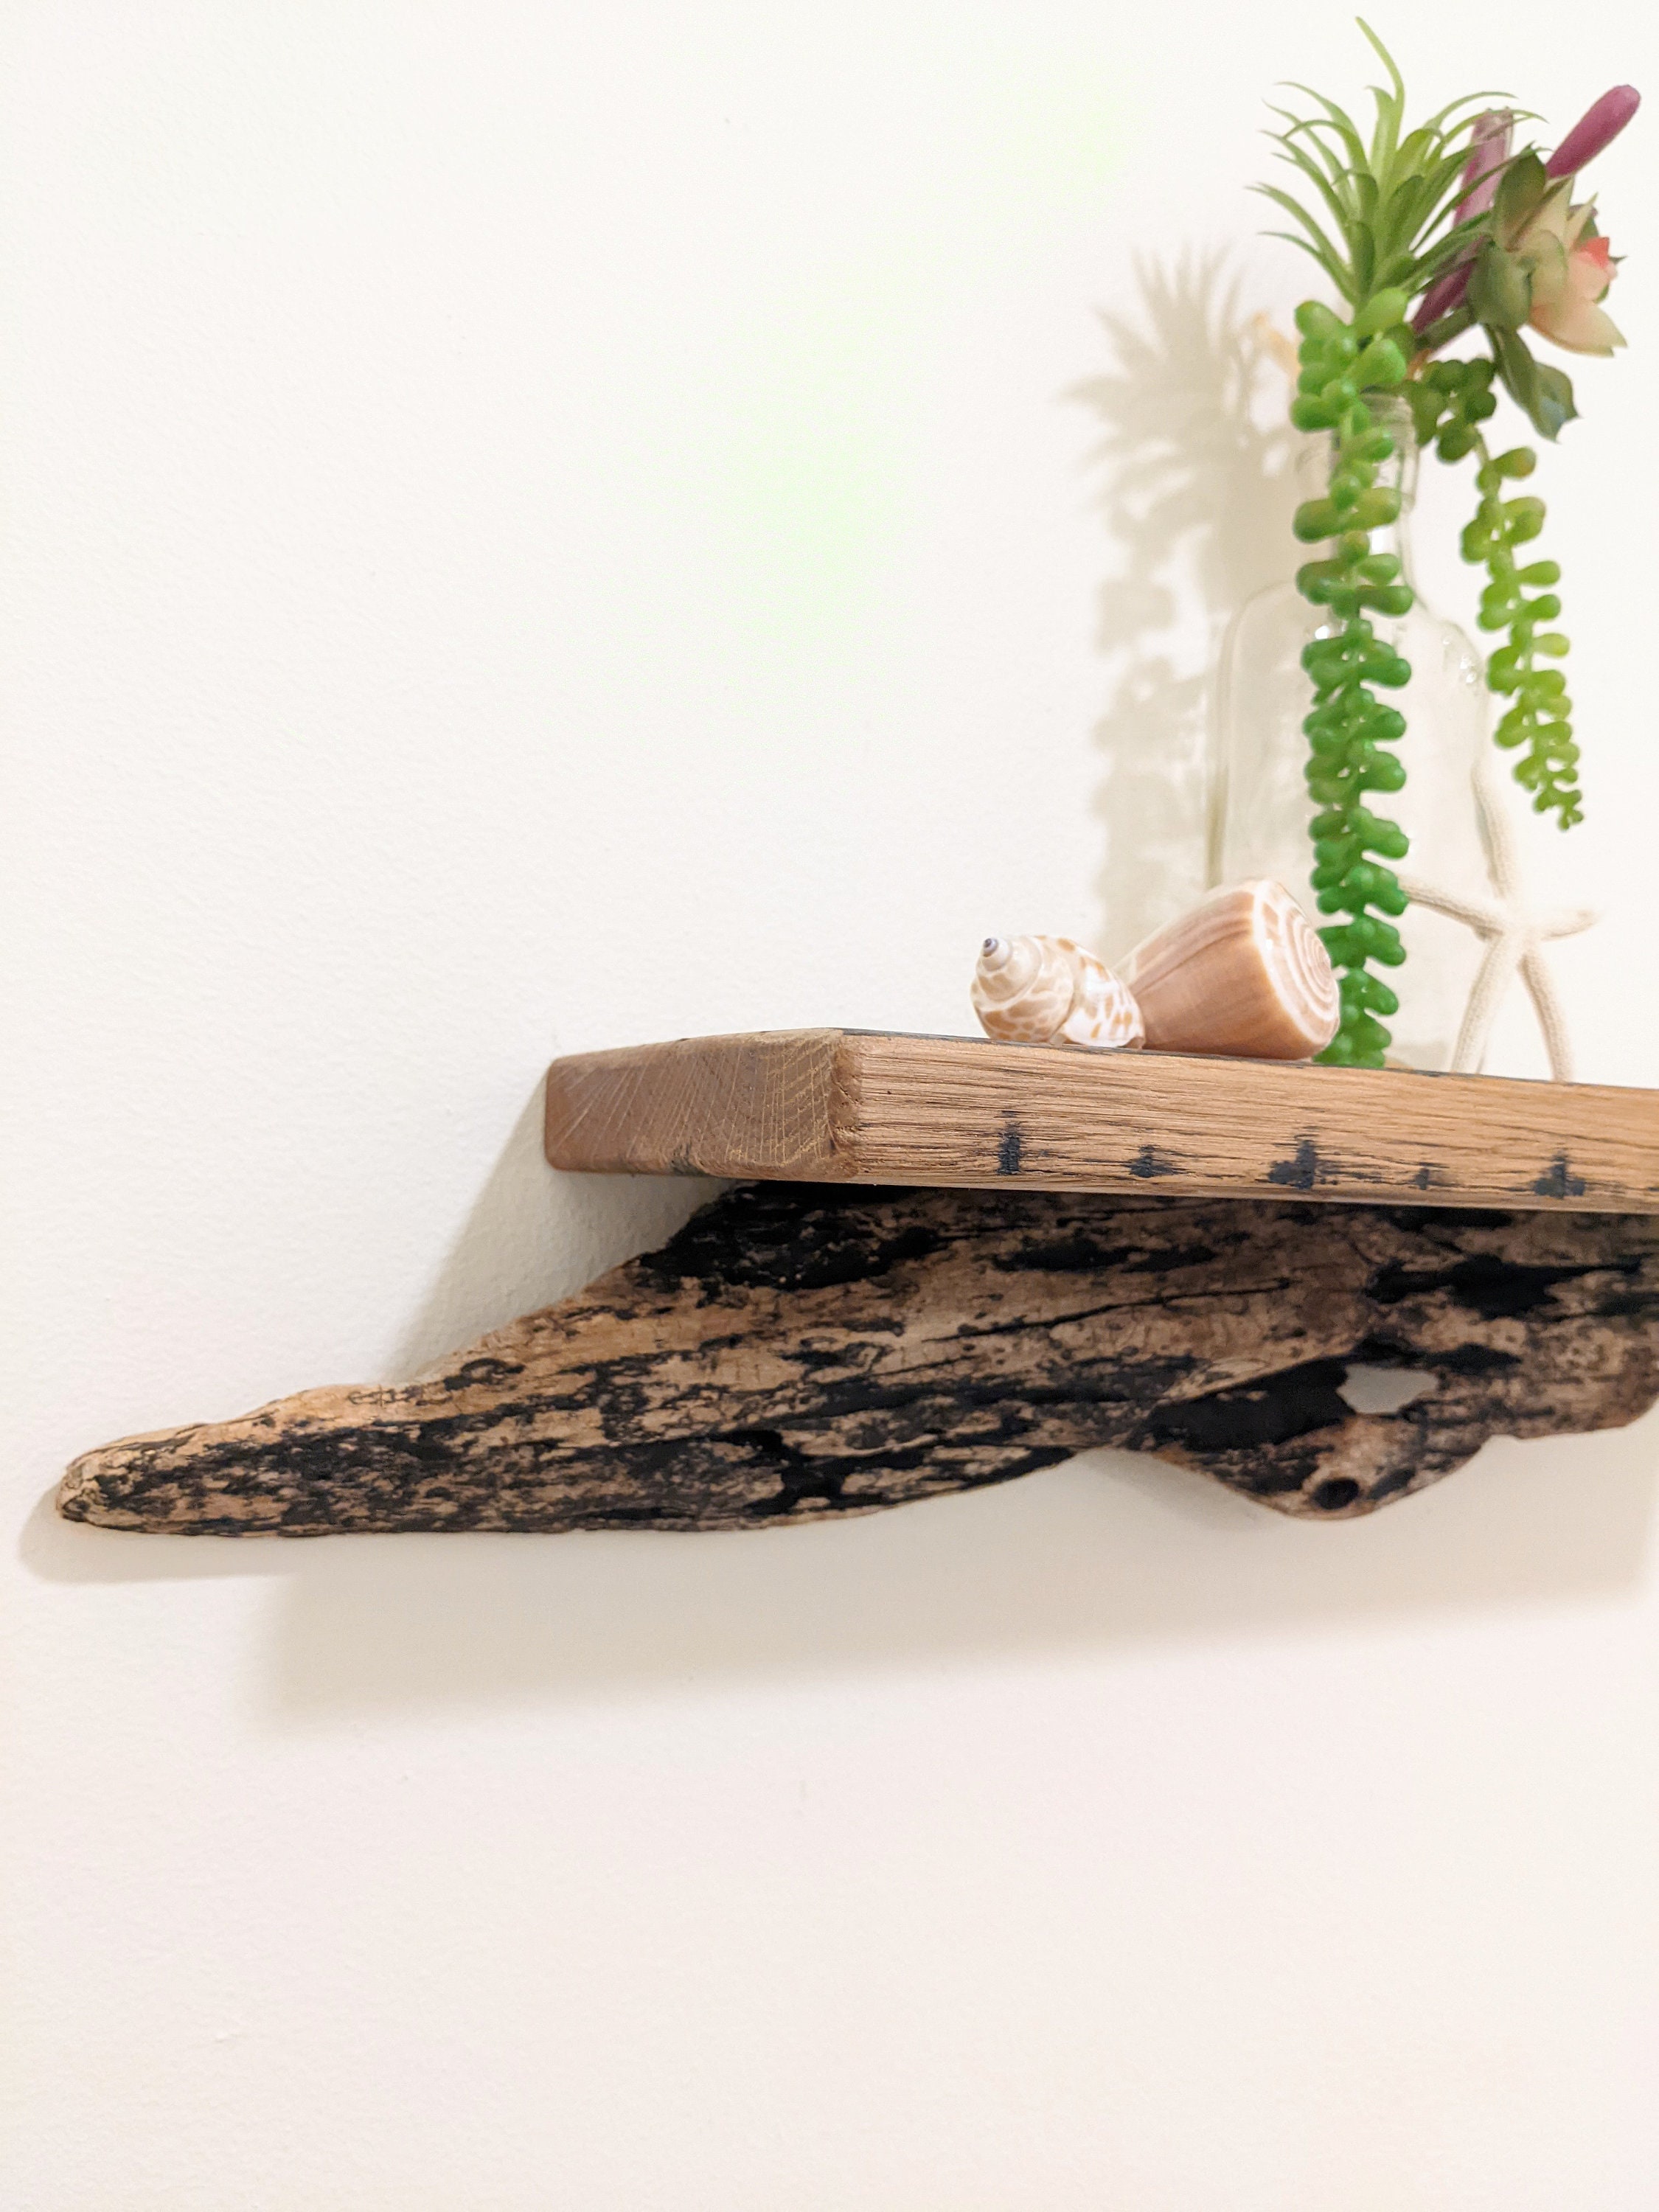 Driftwood Christmas Tree Branches,natural Crafting Driftwood Sticks to  Create a Minimalist Christmas Tree for Home Decor,driftwood Dowels 